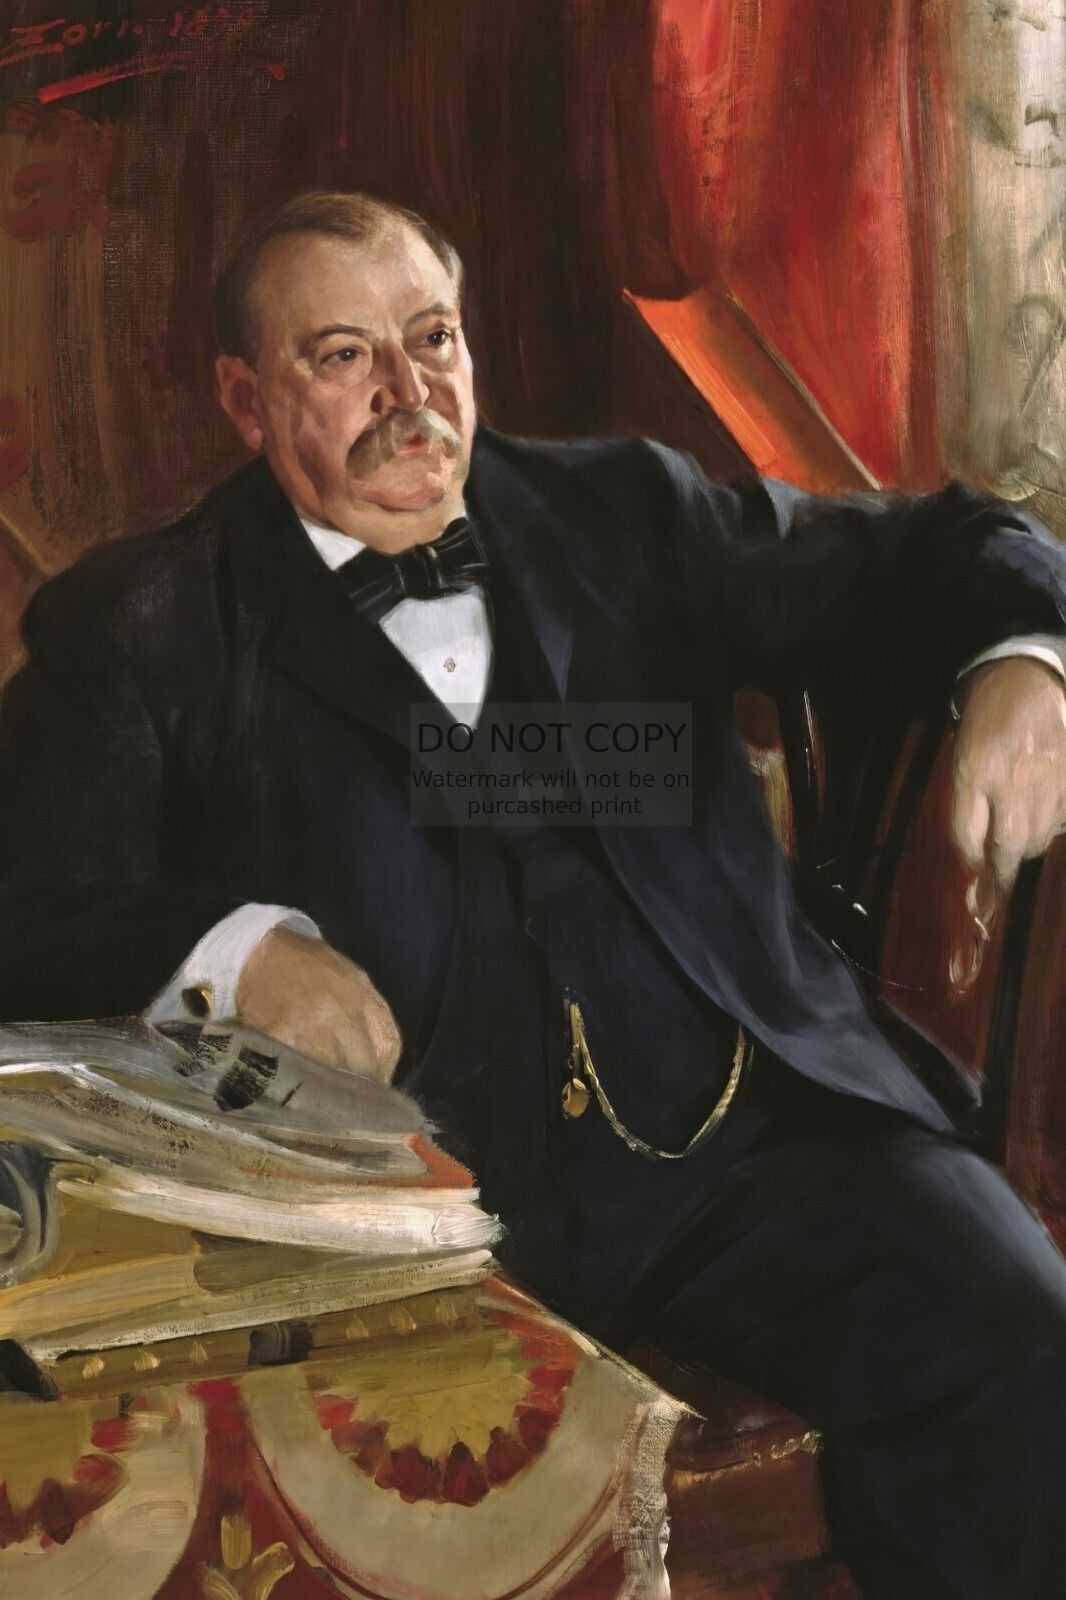 PRESIDENT GROVER CLEVELAND PRESIDENTIAL PAINTING 4X6 PHOTO POSTCARD